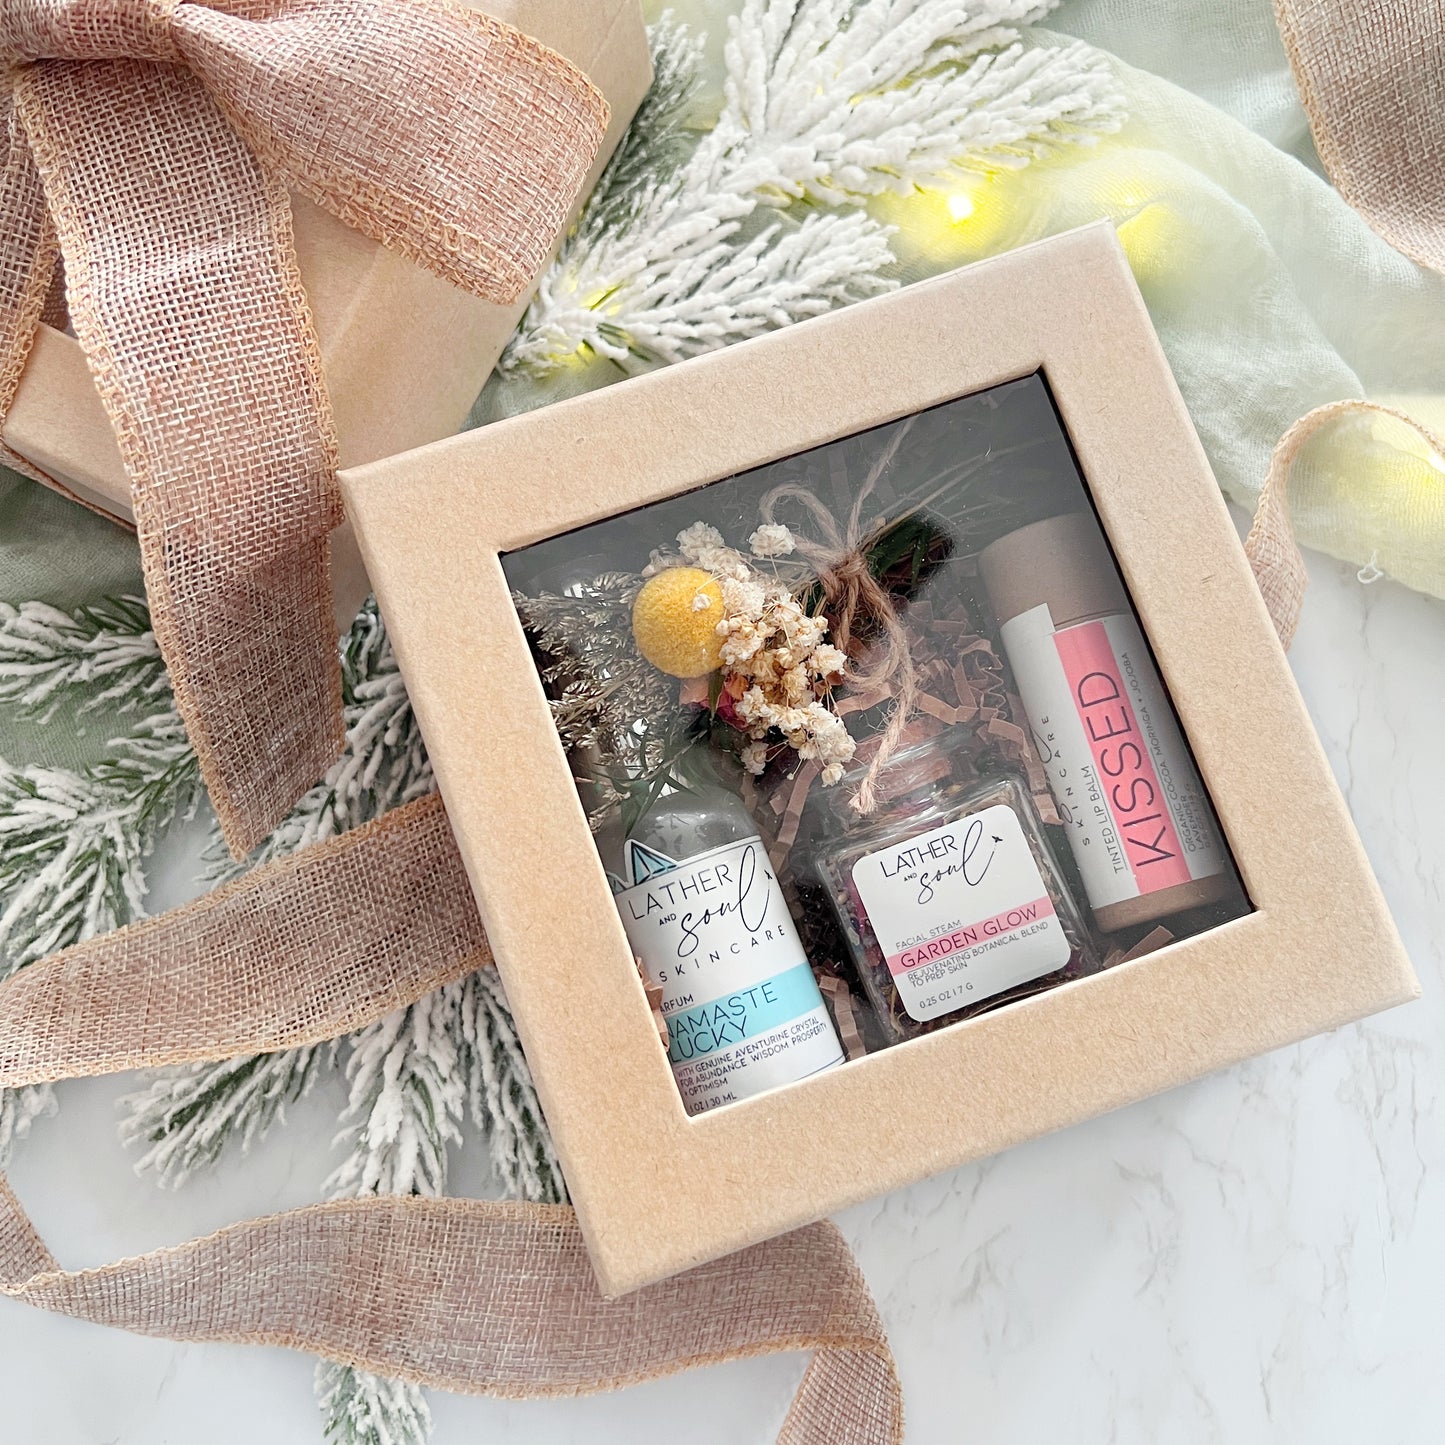 The perfect gift set for the holidays with perfume, tinted lip balm, facial steam, and a mini dried floral bouquet, from Lather and Soul